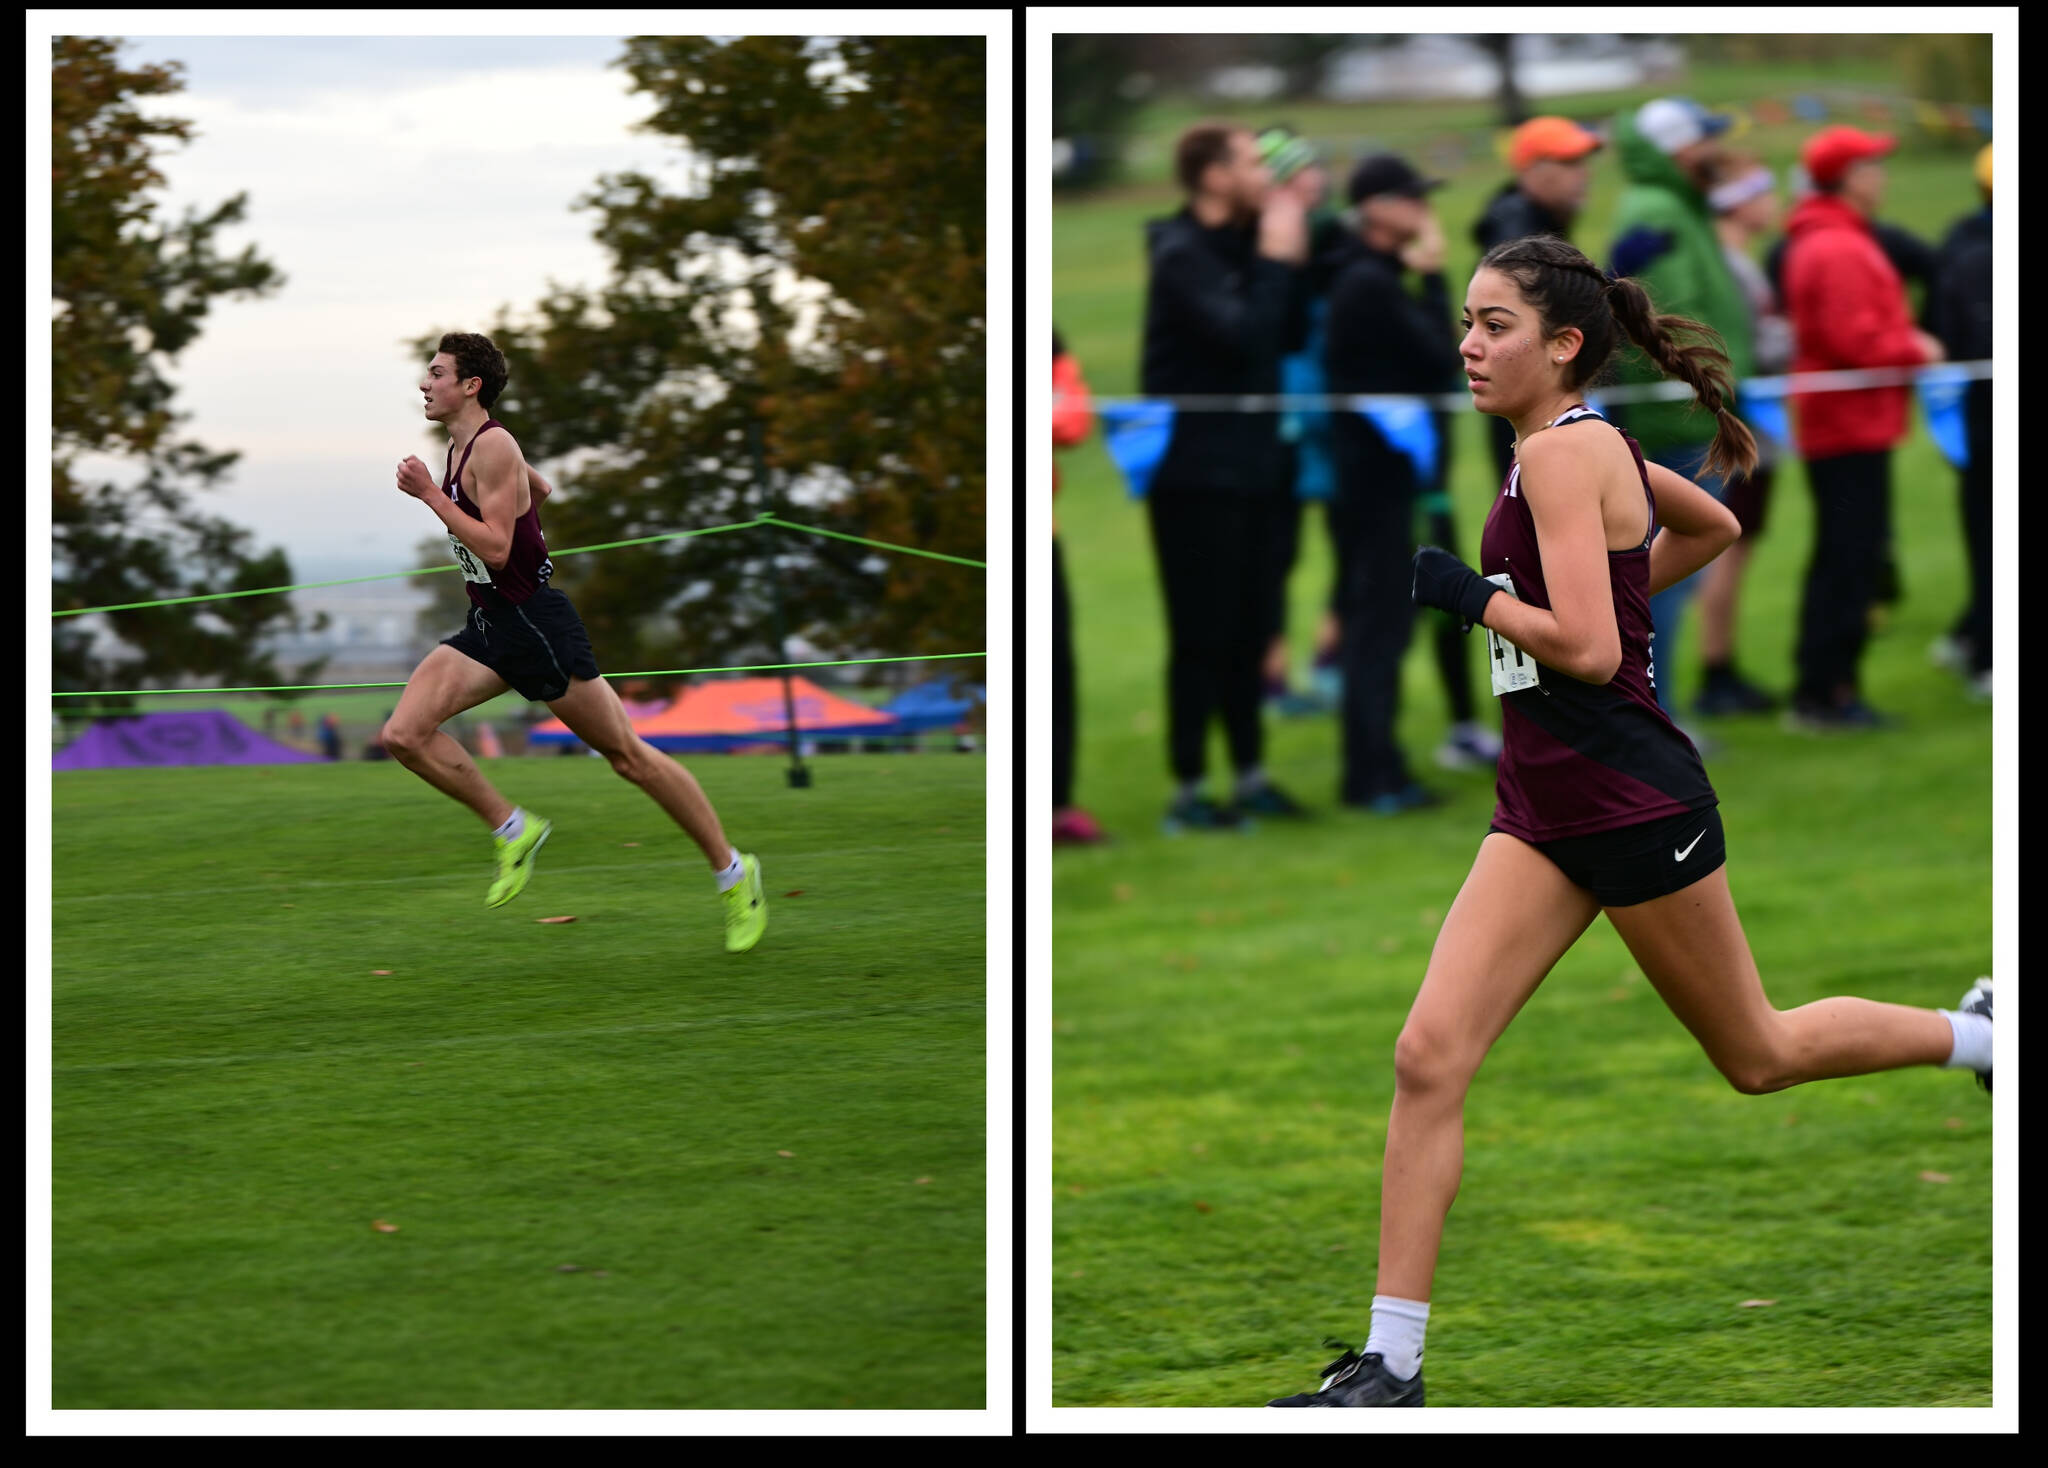 Mercer Island High School 3A state cross country champions Owen Powell and Sophia Rodriguez. Photos courtesy of Aaron Koopman